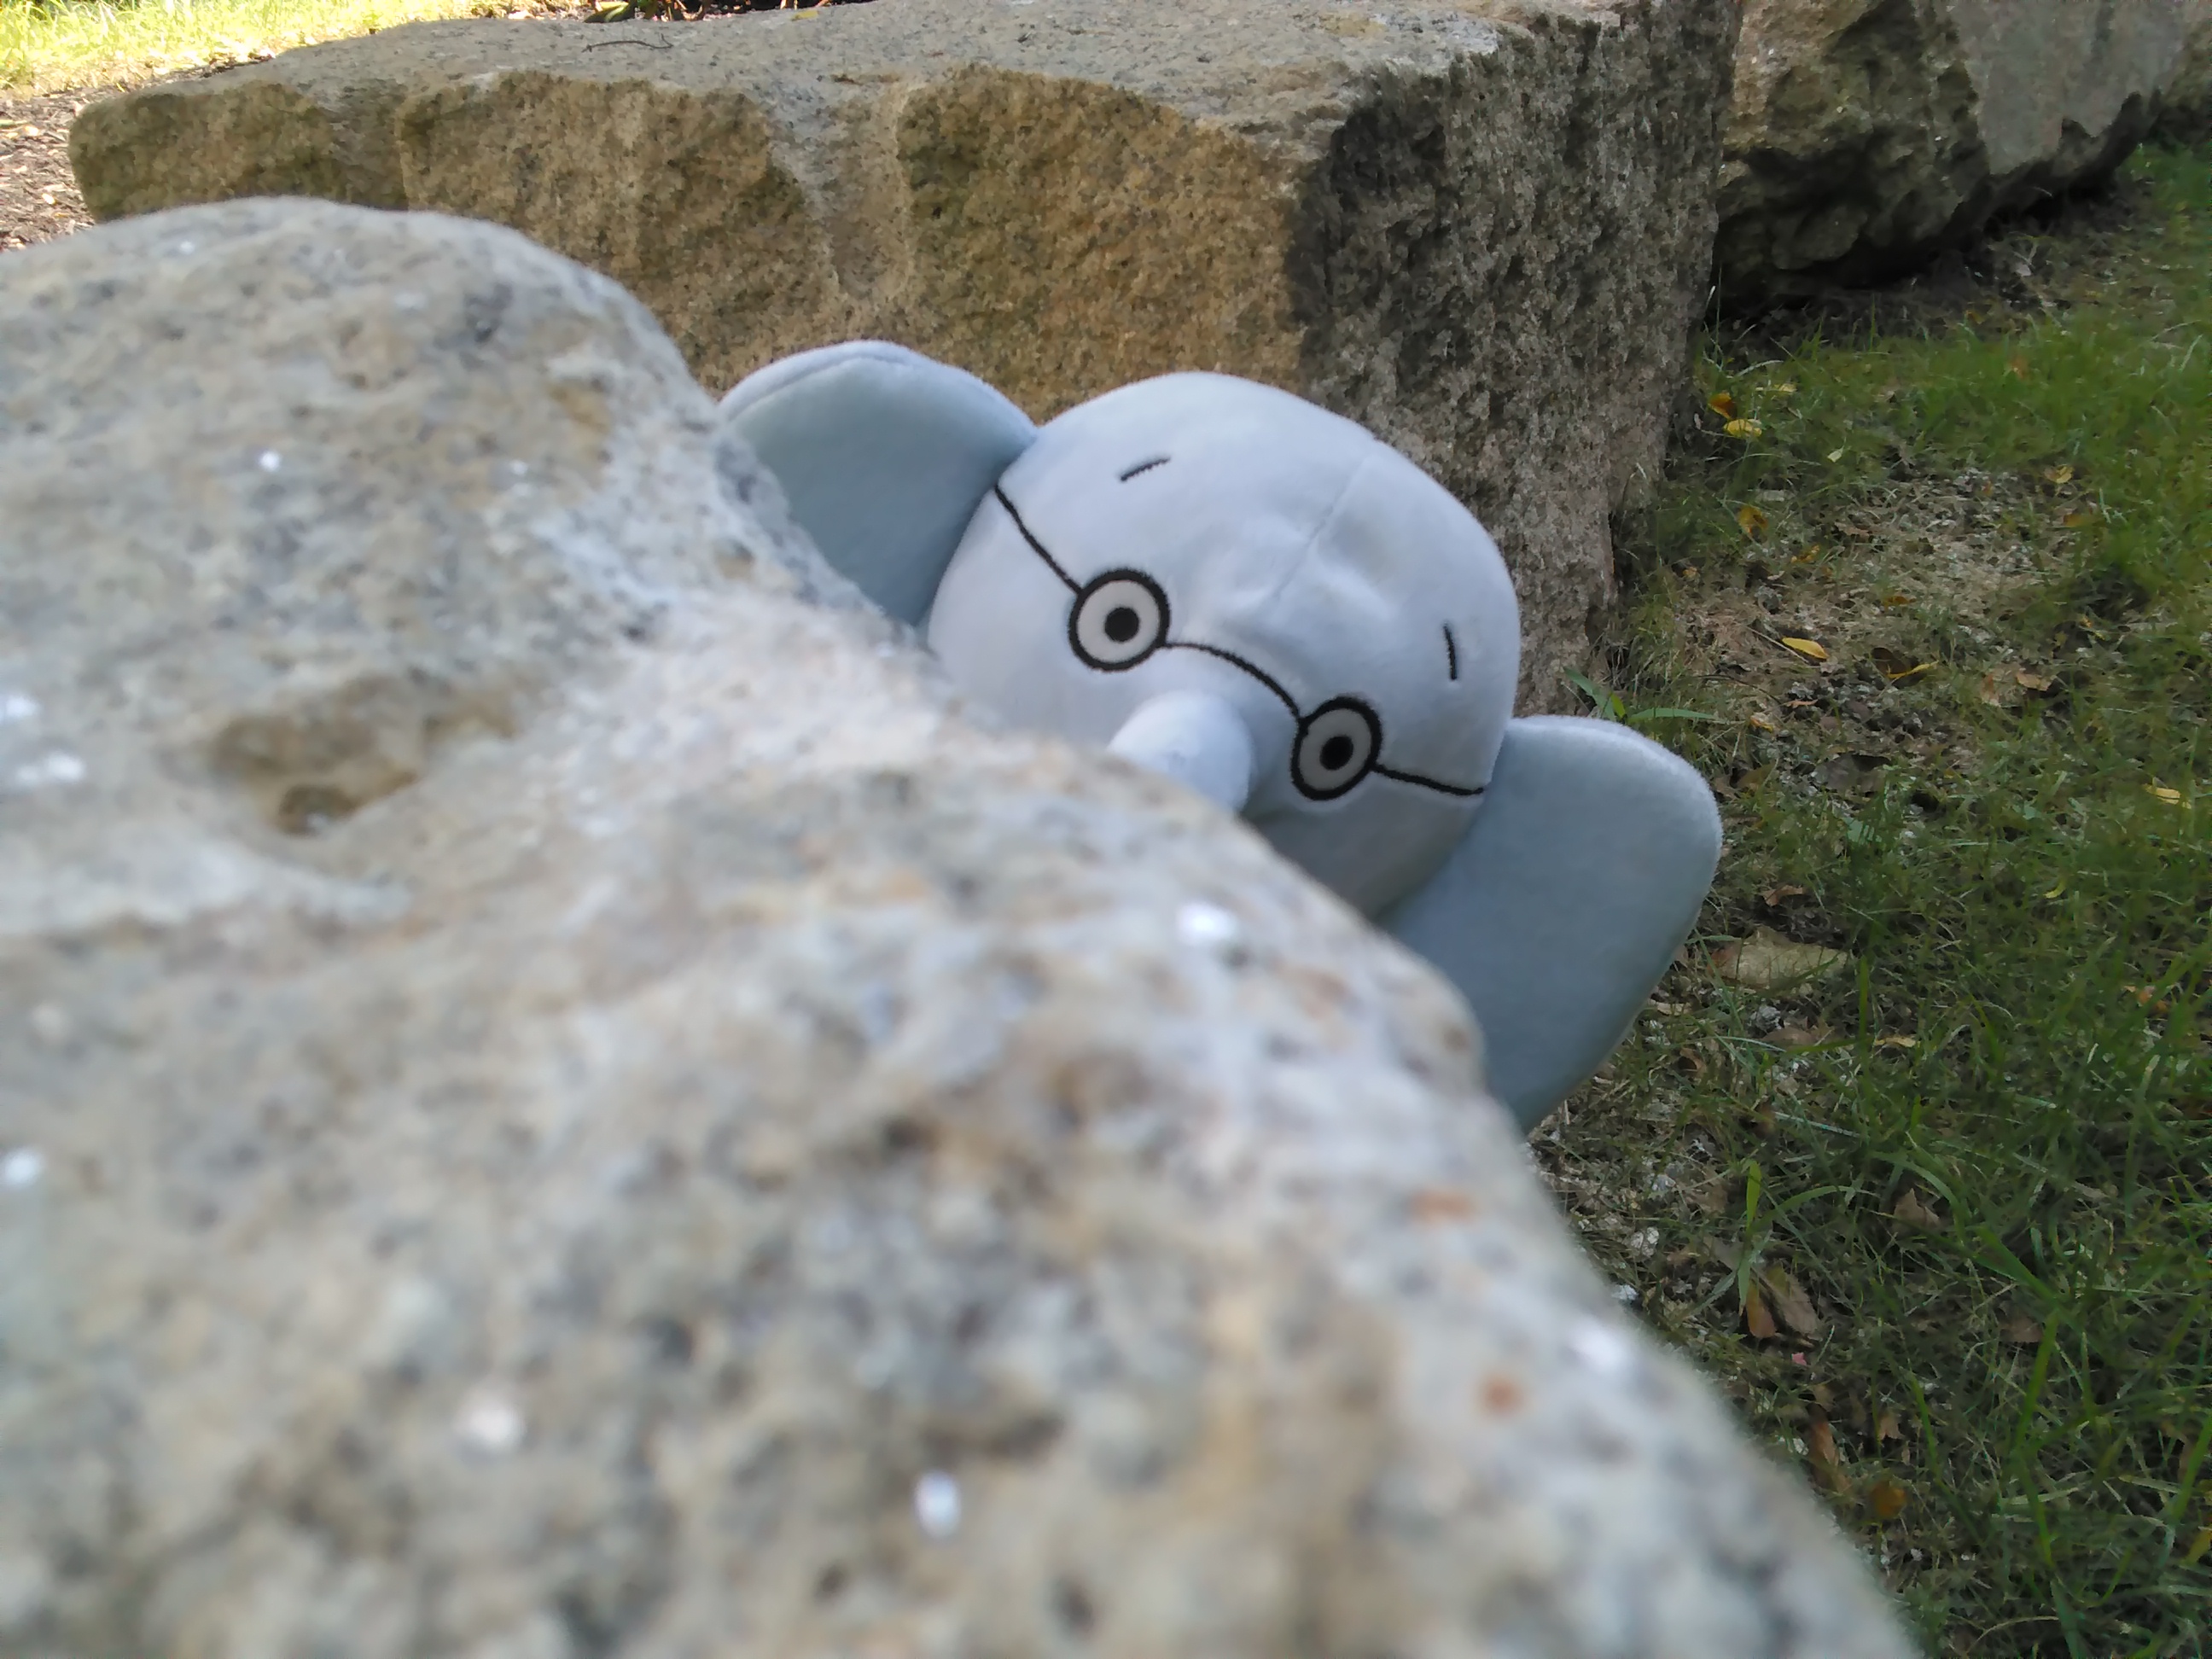 Gerald the elephant peeking out from behind a rock